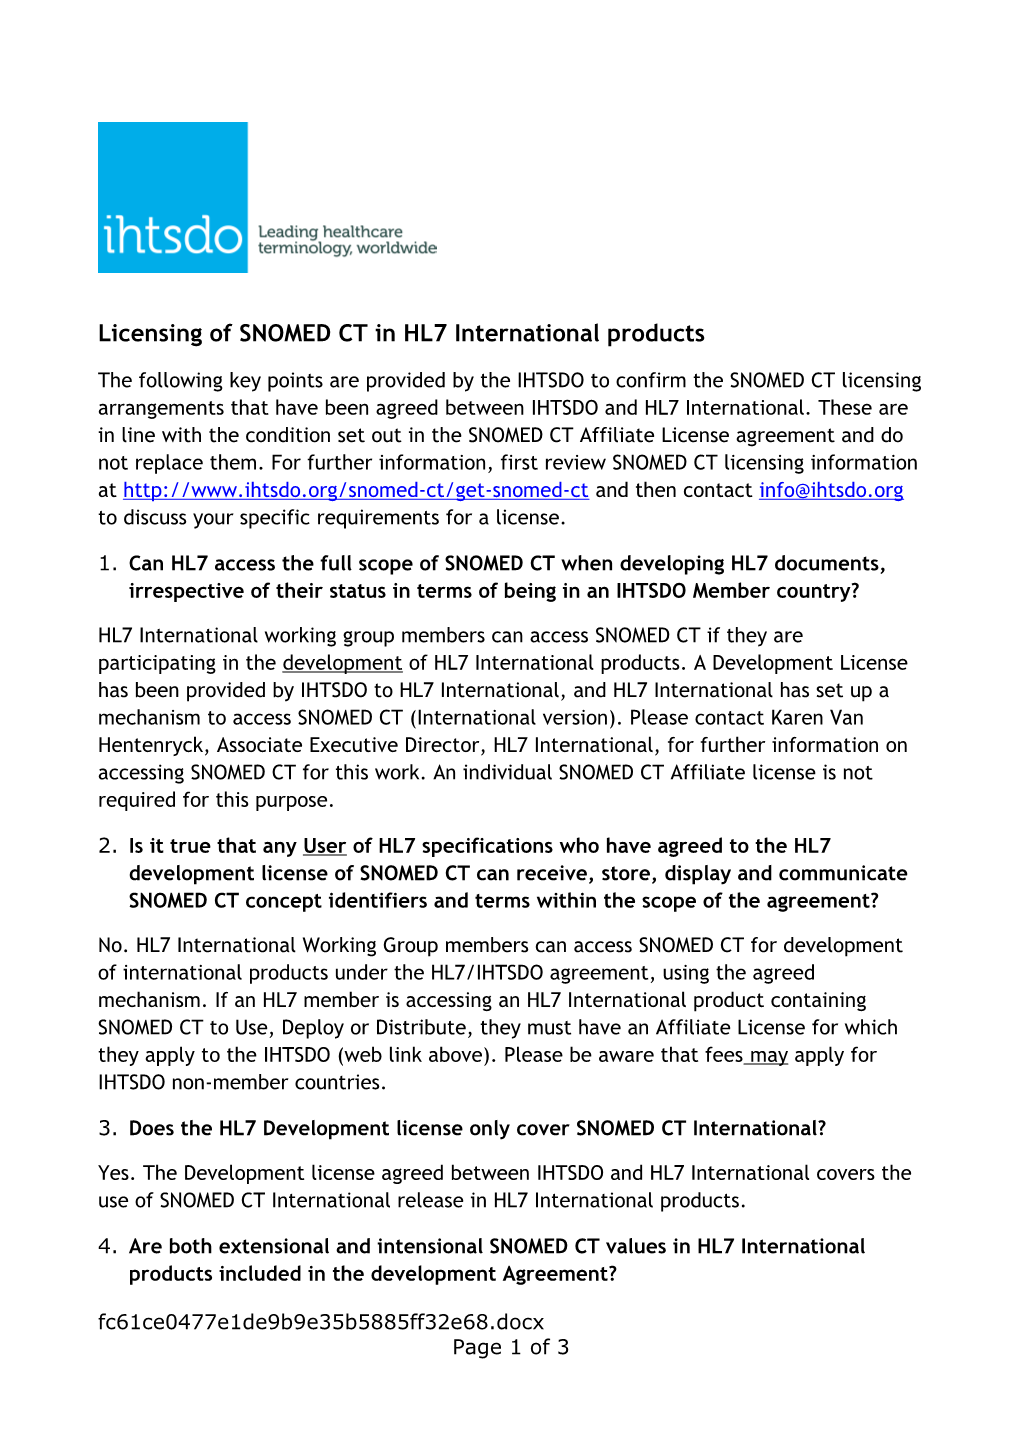 Licensing of SNOMED CT in HL7 International Products